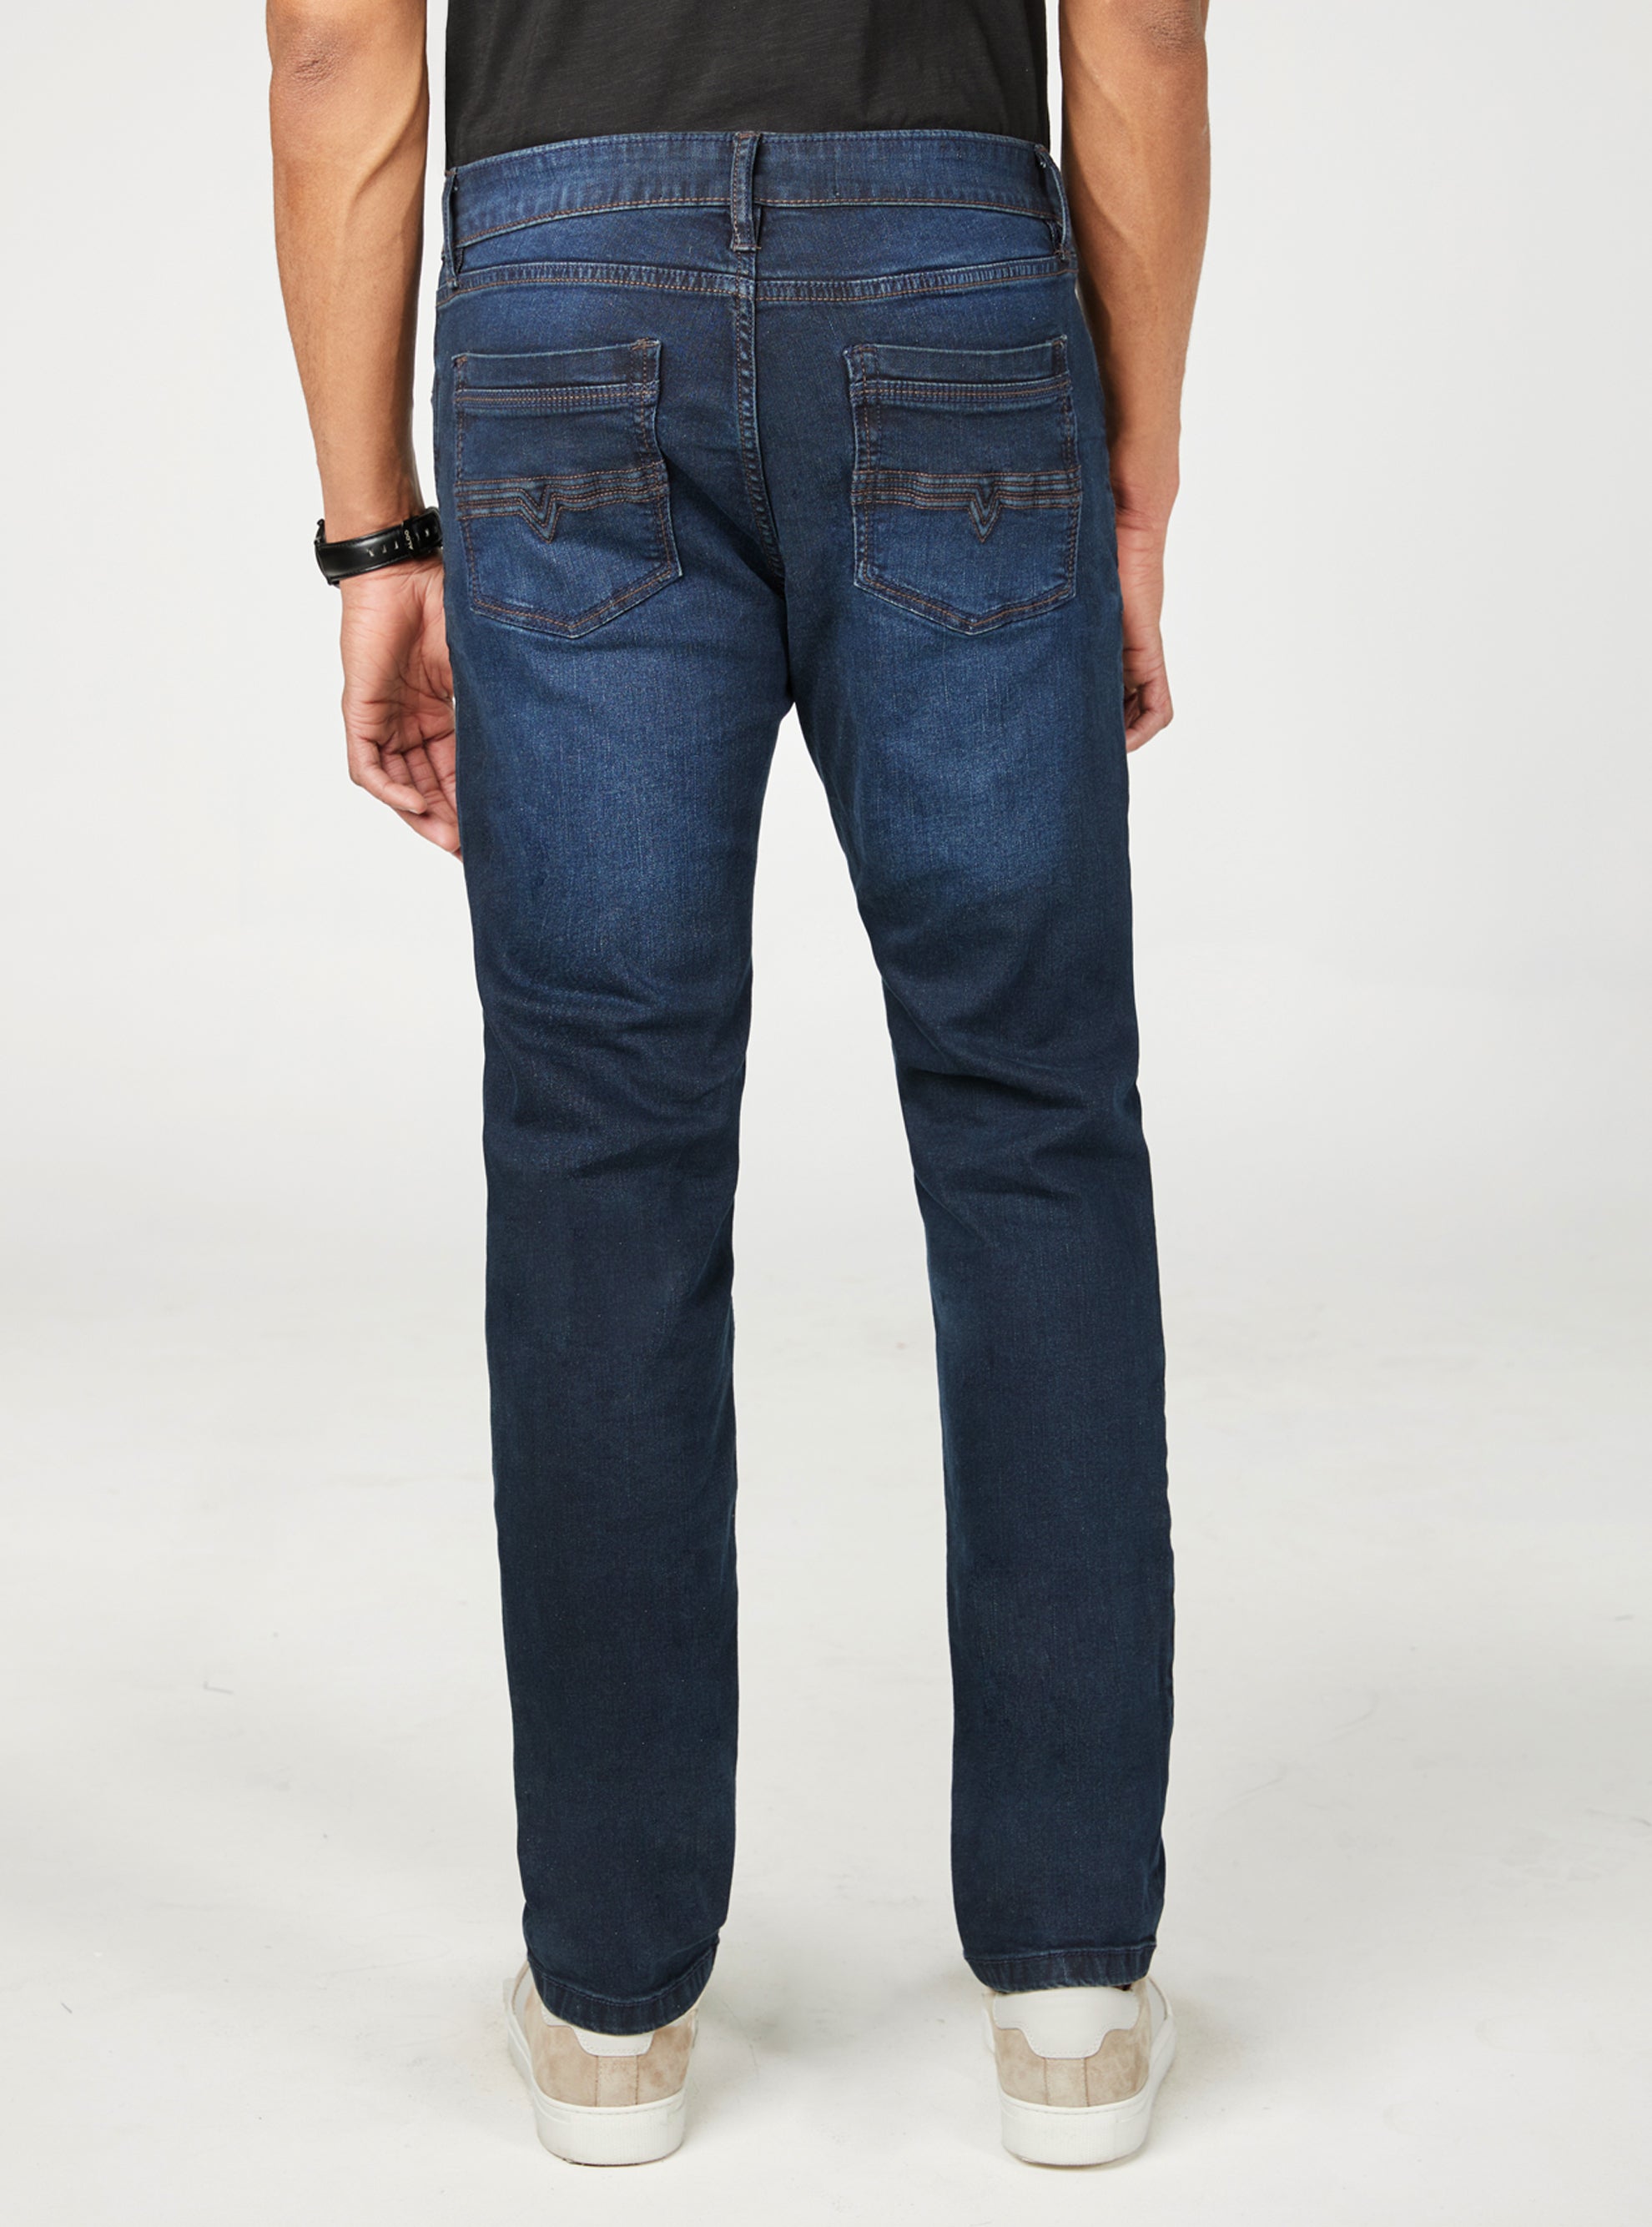 Blue men's jeans with contrasting detail